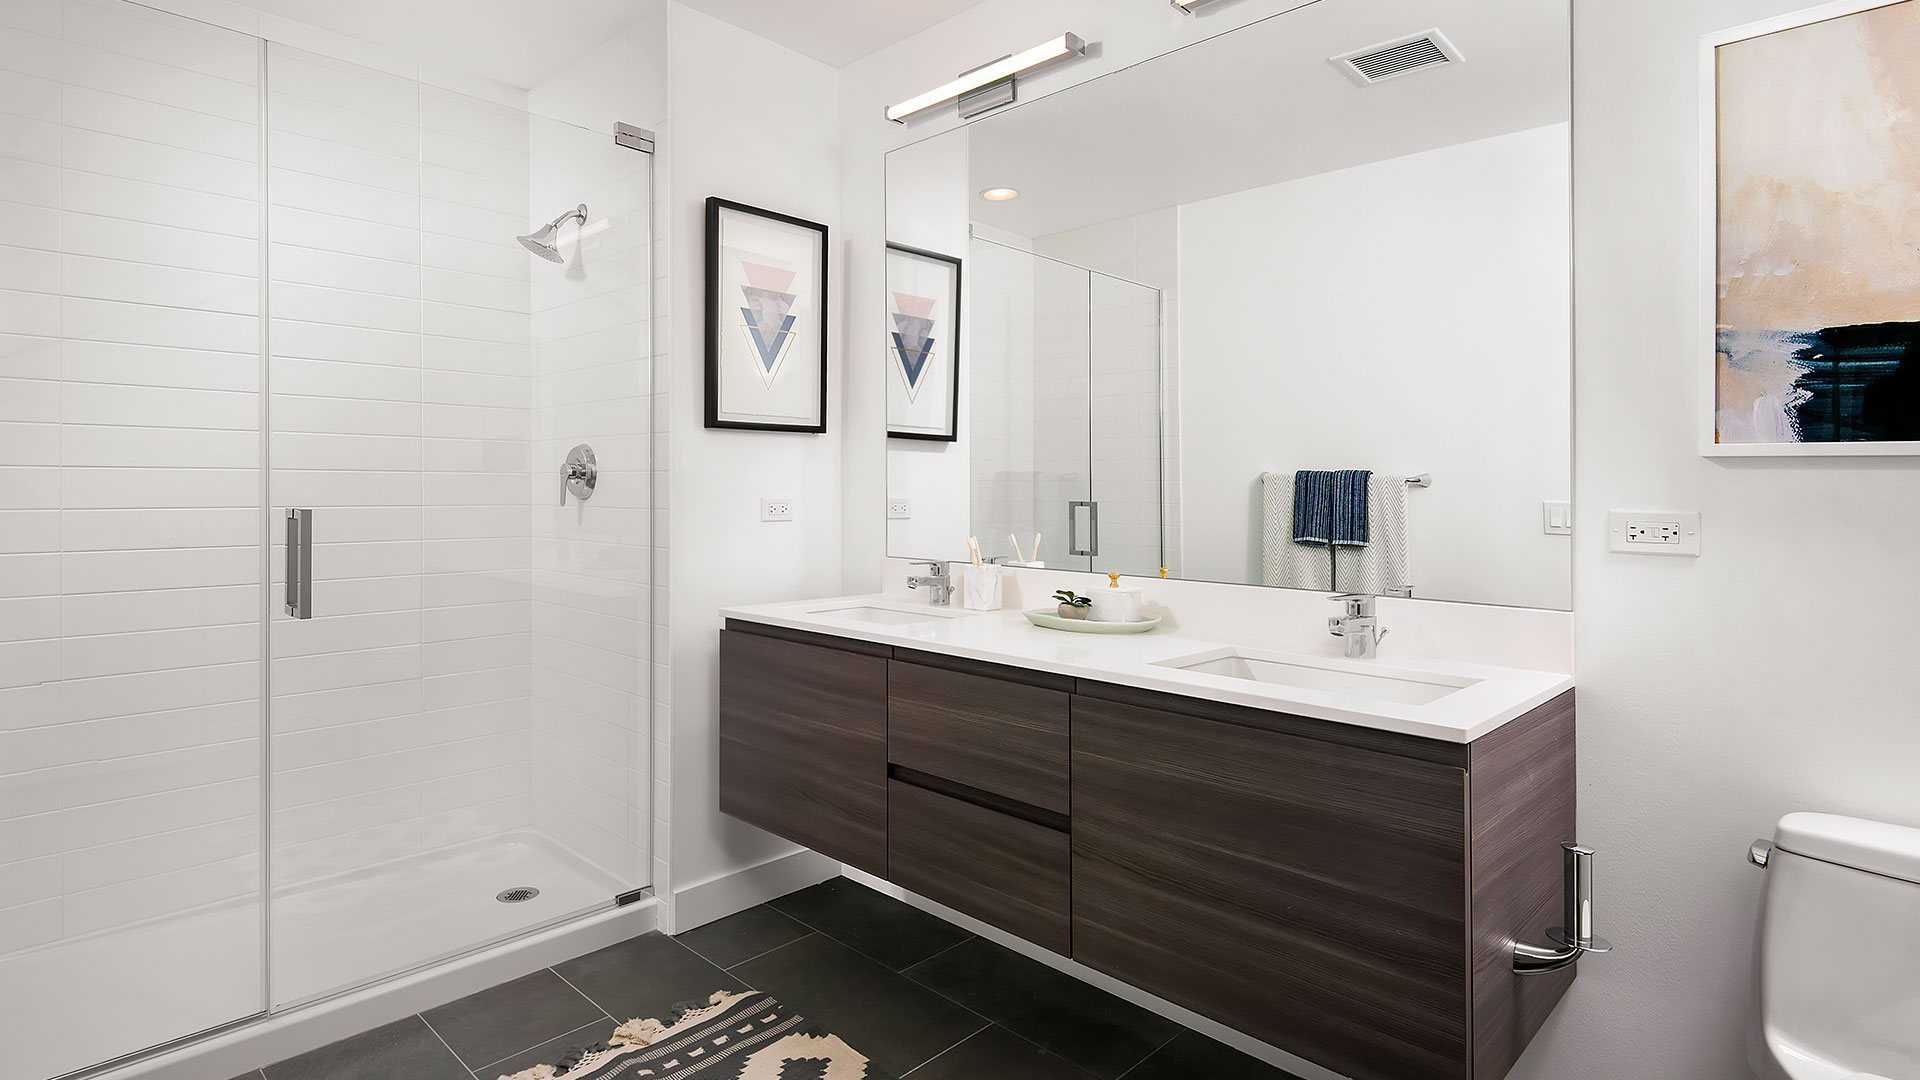 A bathroom in a Hubbard221 residence. A standing shower is on the left with a glass, frameless door. The double vanity is floating on the right with a full mirror mounted behind.